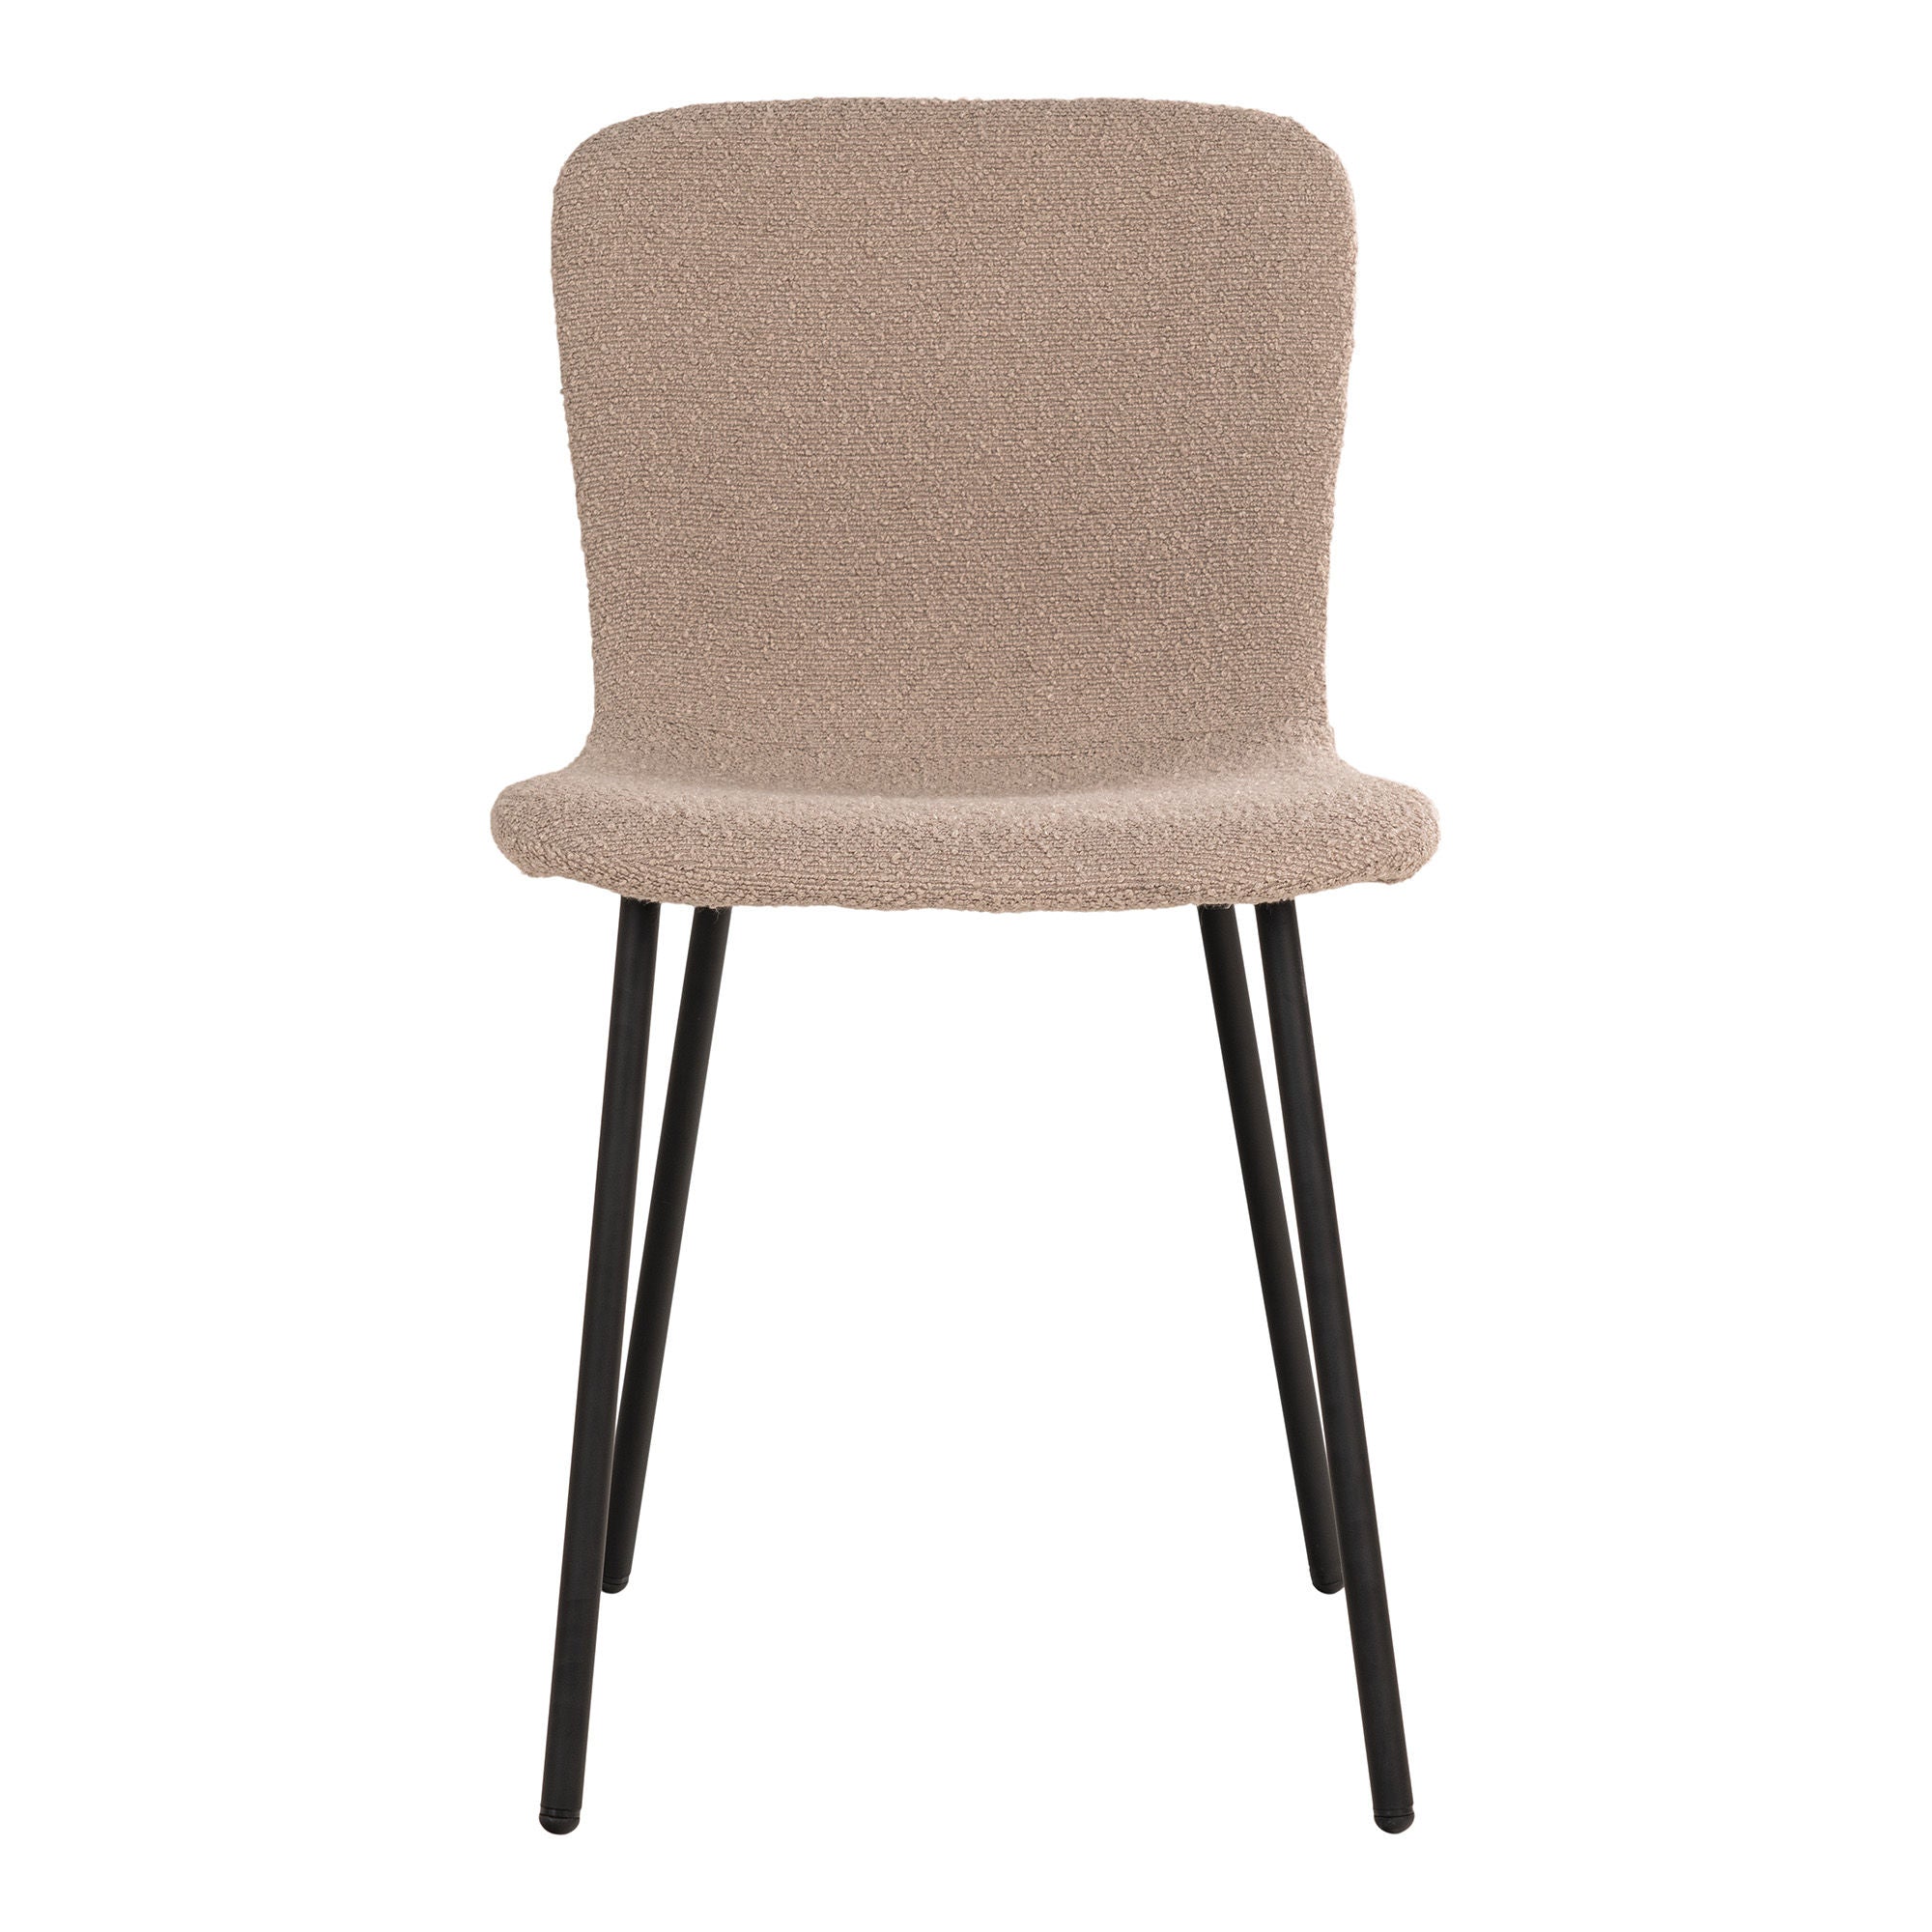 House Nordic Halden Dining Chair - Set of 2